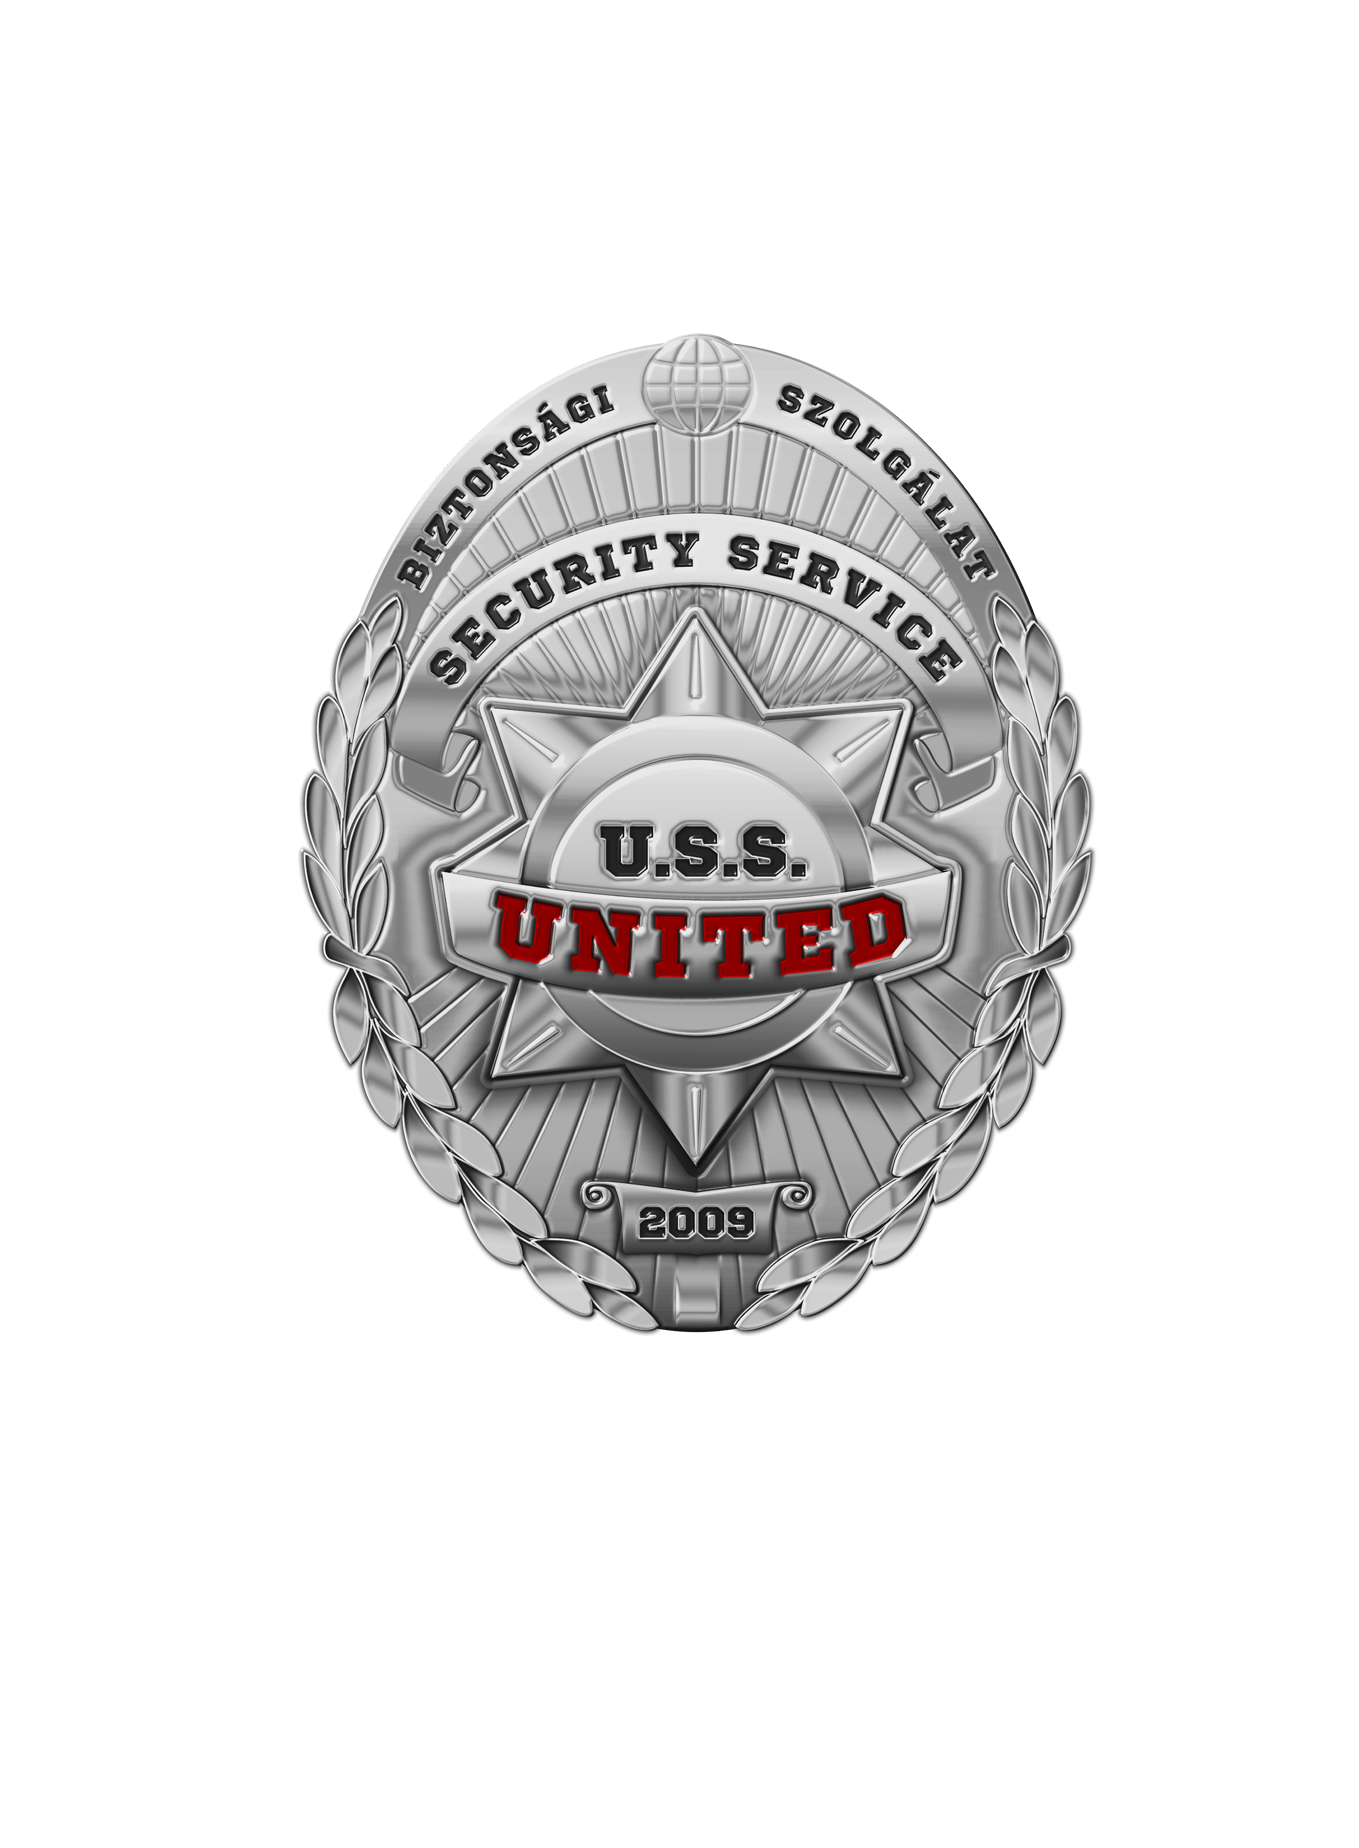 United Security Service